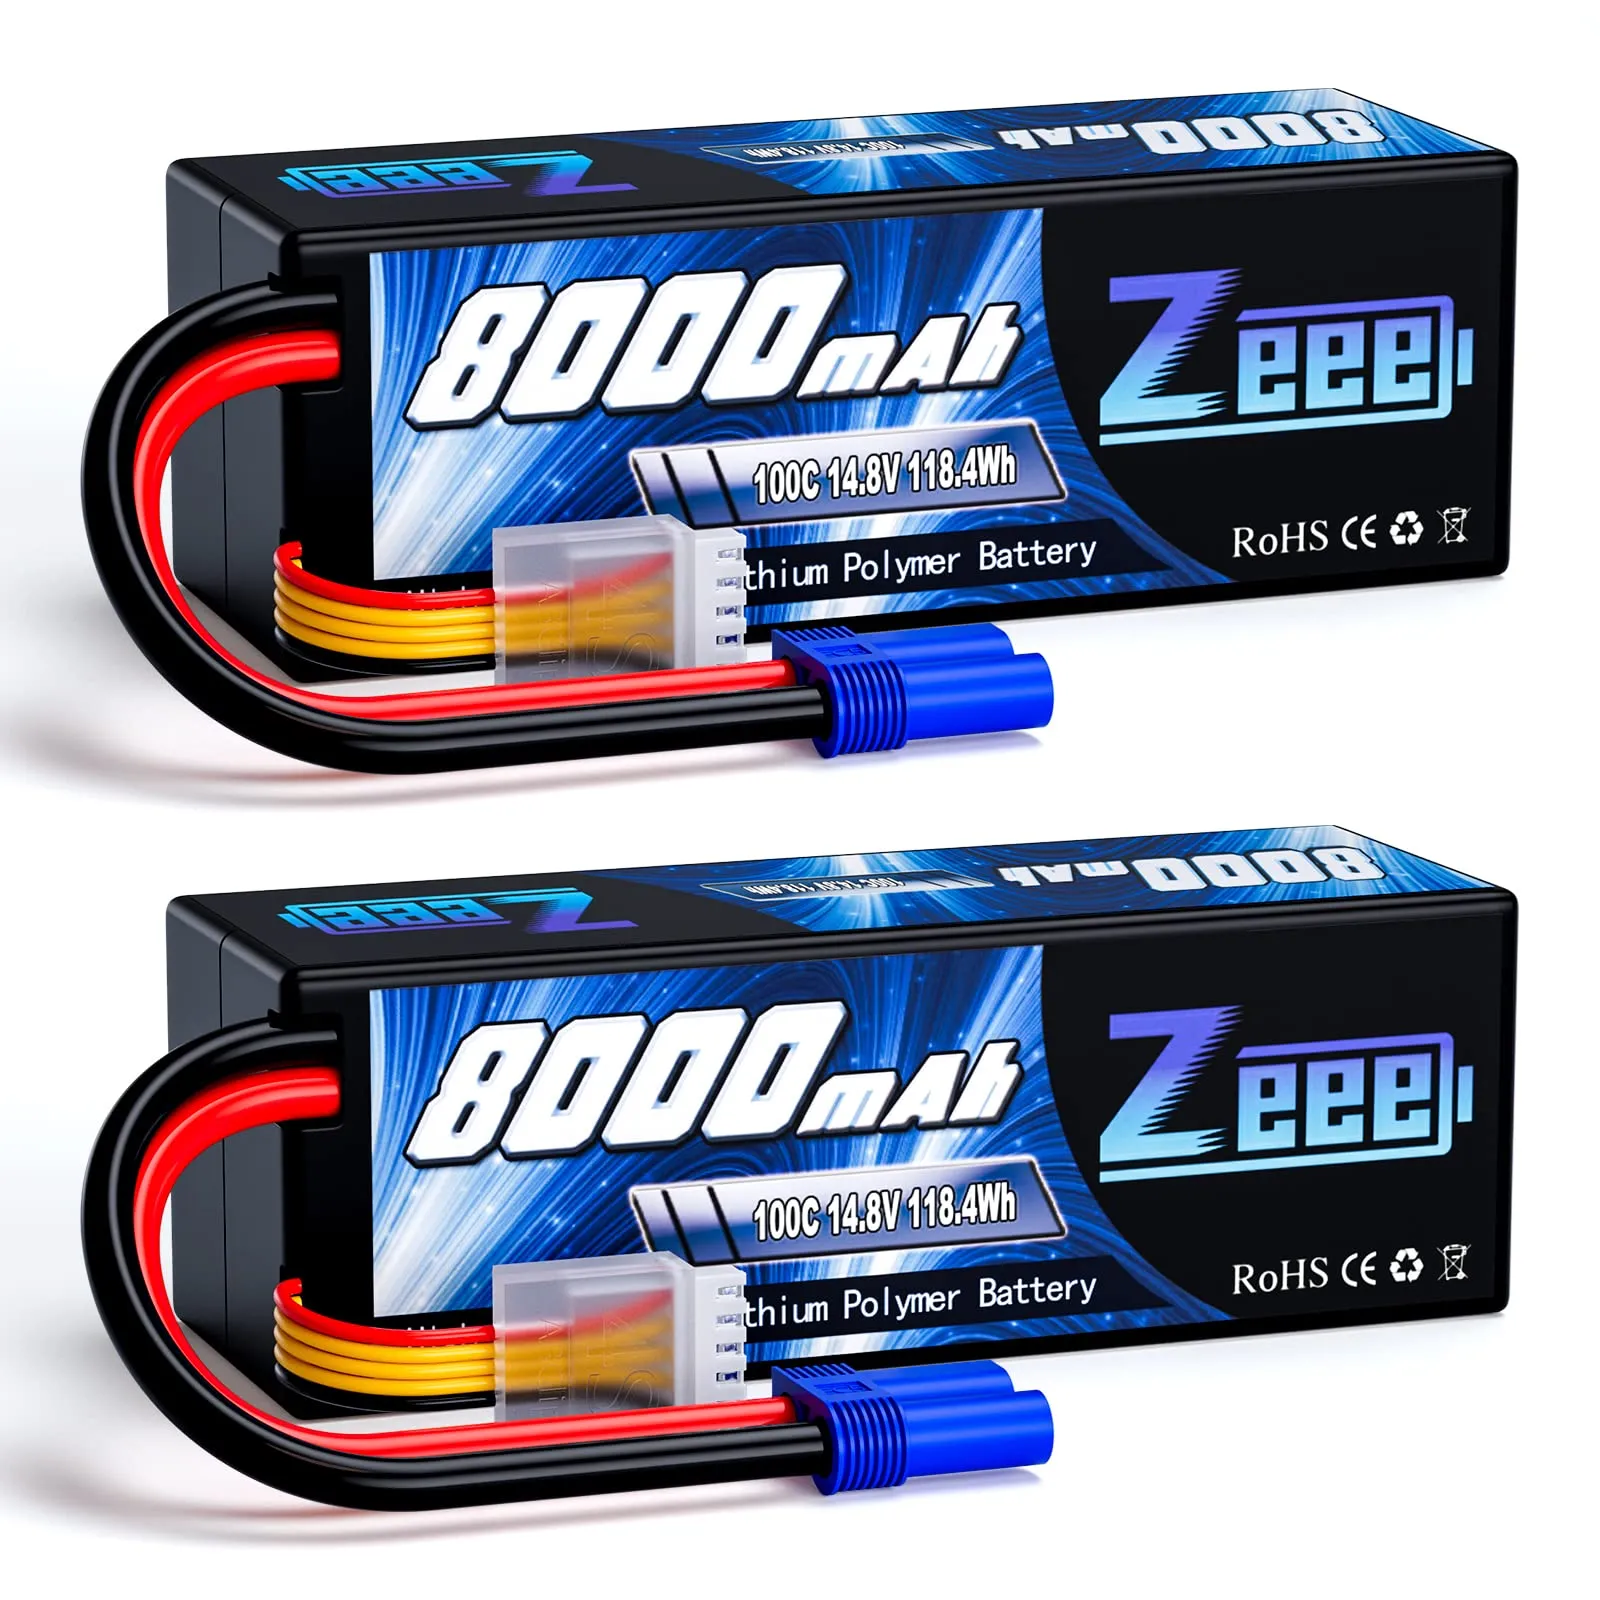 What is the best 4s lipo battery for the Traxxas Xmaxx 8s